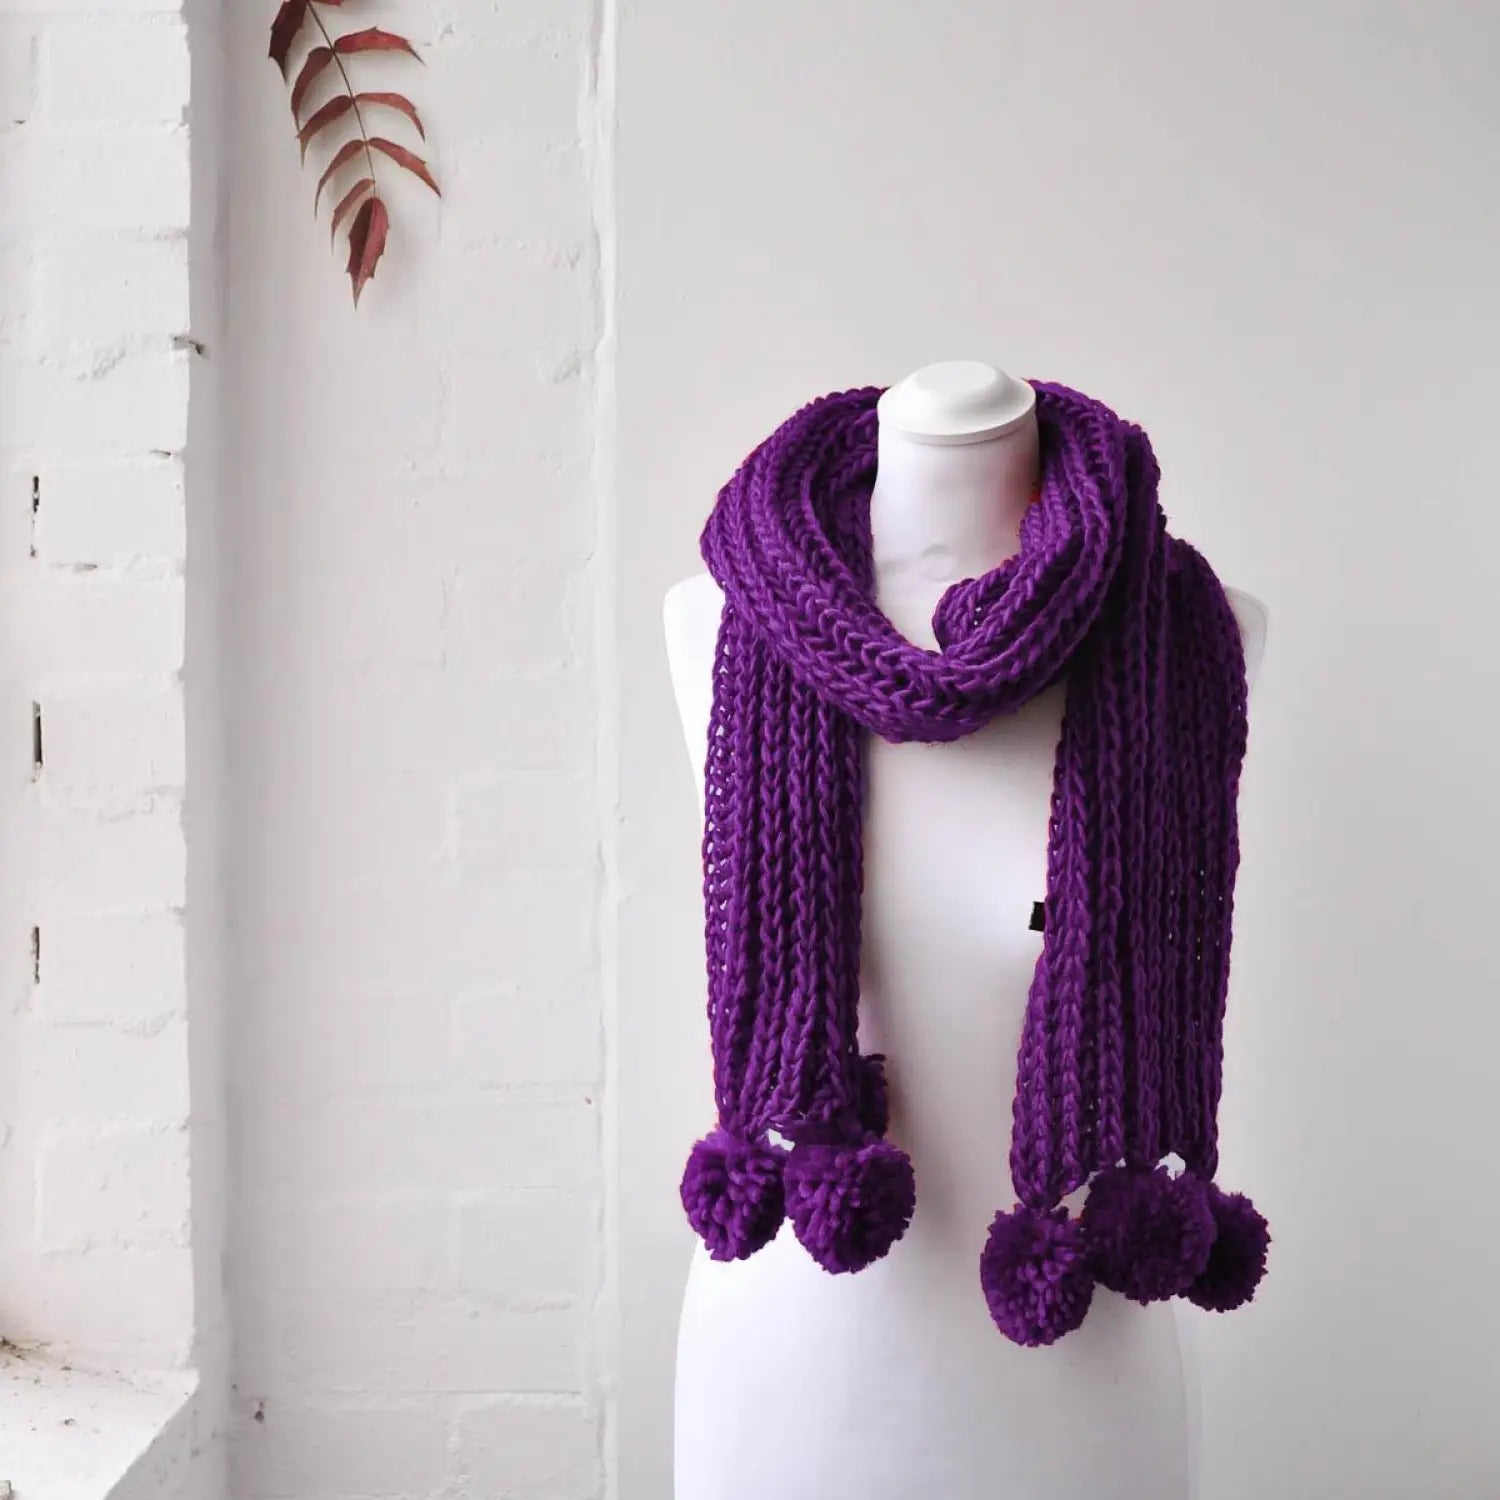 Chunky Knit Winter Scarf with Pom Pom Accents on Mannequin Dummy